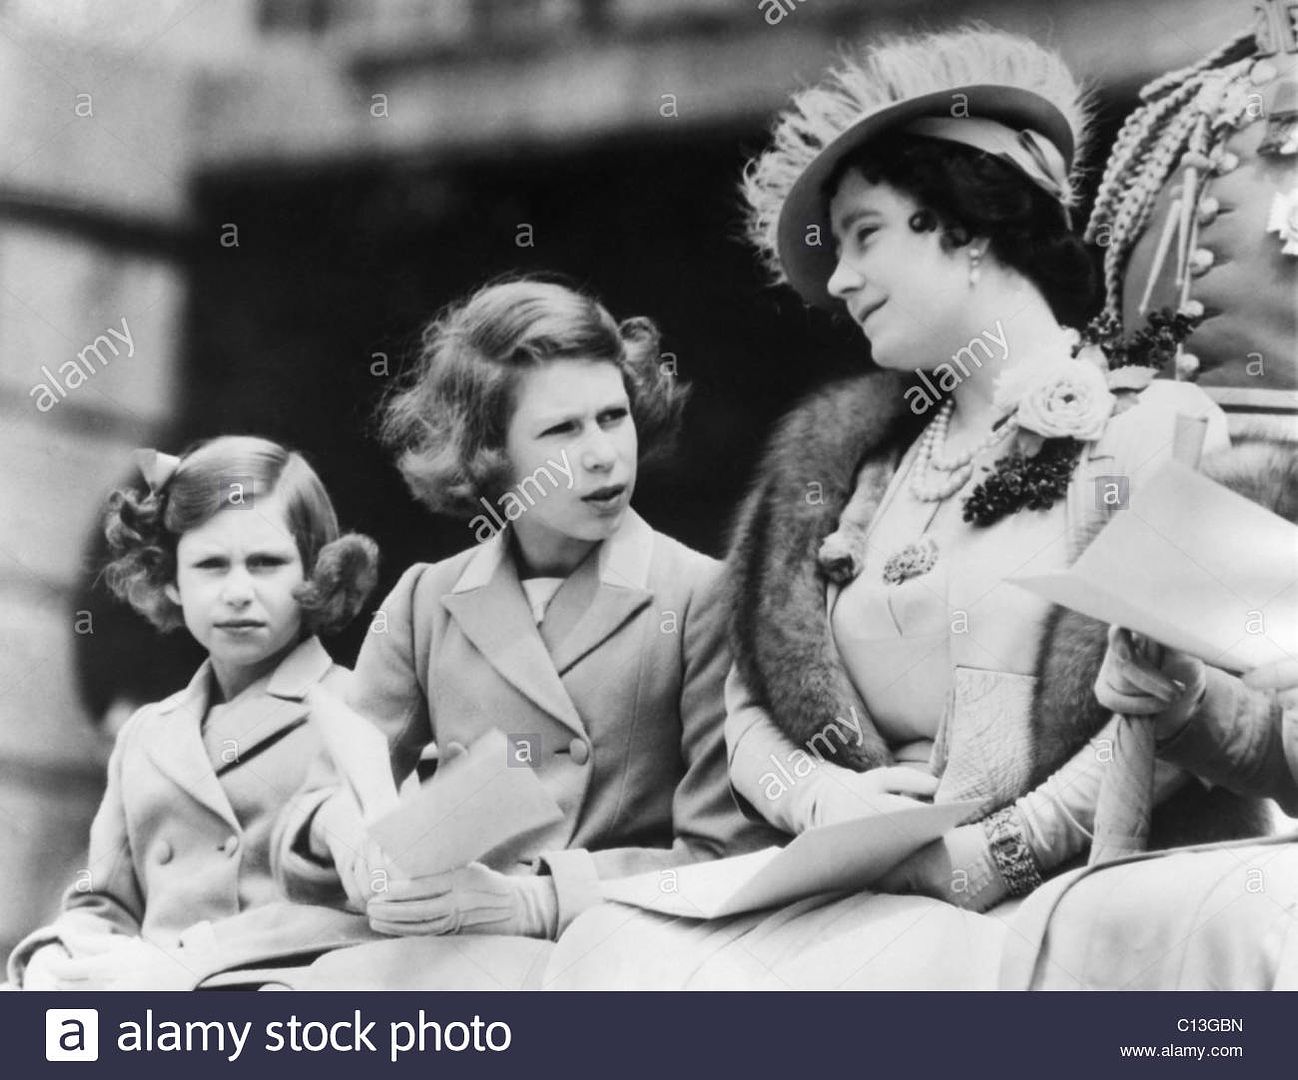 Bracelet_and_brooch_queen-elizabeth-right-the-former-duchess-of-york-and-her-children-C13GBN